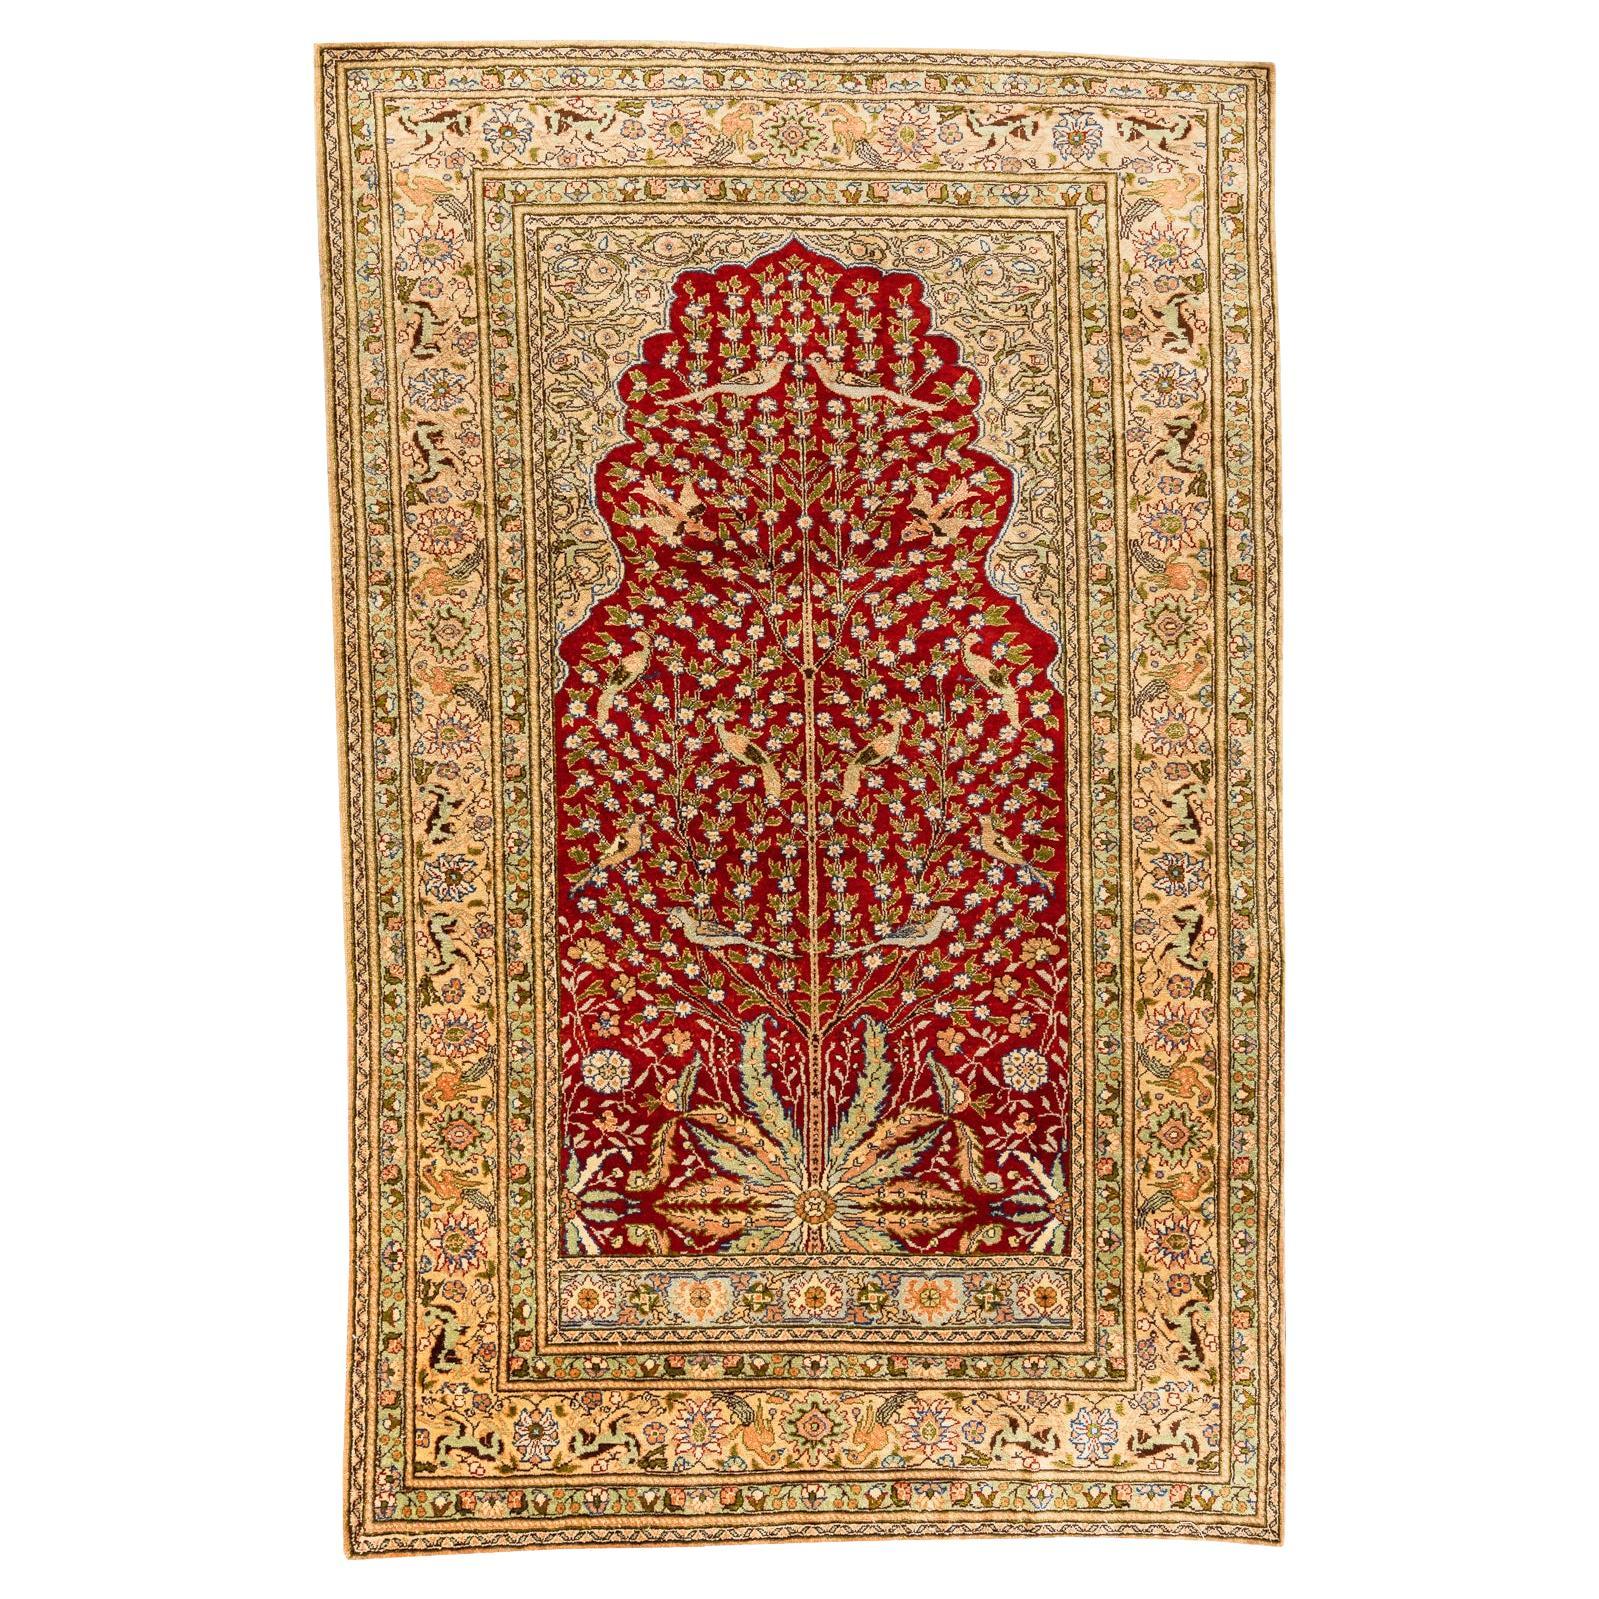 Kayseri Silk – Anatolia

This Turkish carpet is hand-woven in pure silk with a tree-of-life design. Featuring an ogival niche, this silk rug is made to impress. The tree of life stretches upwards with long branches surrounded by a dense pattern of